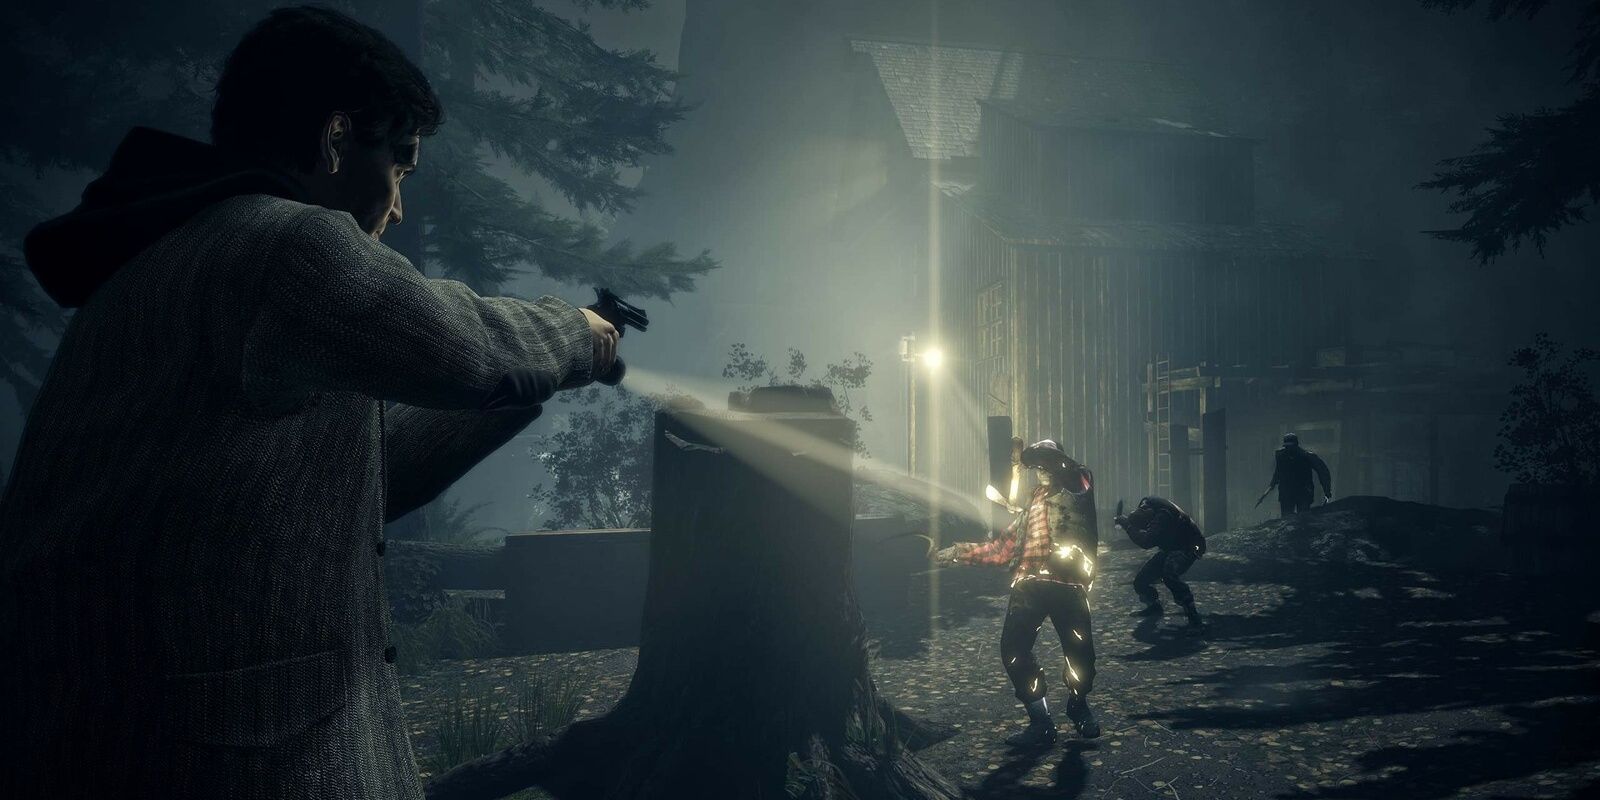 alan wake using flashlight on darkness corrupted person